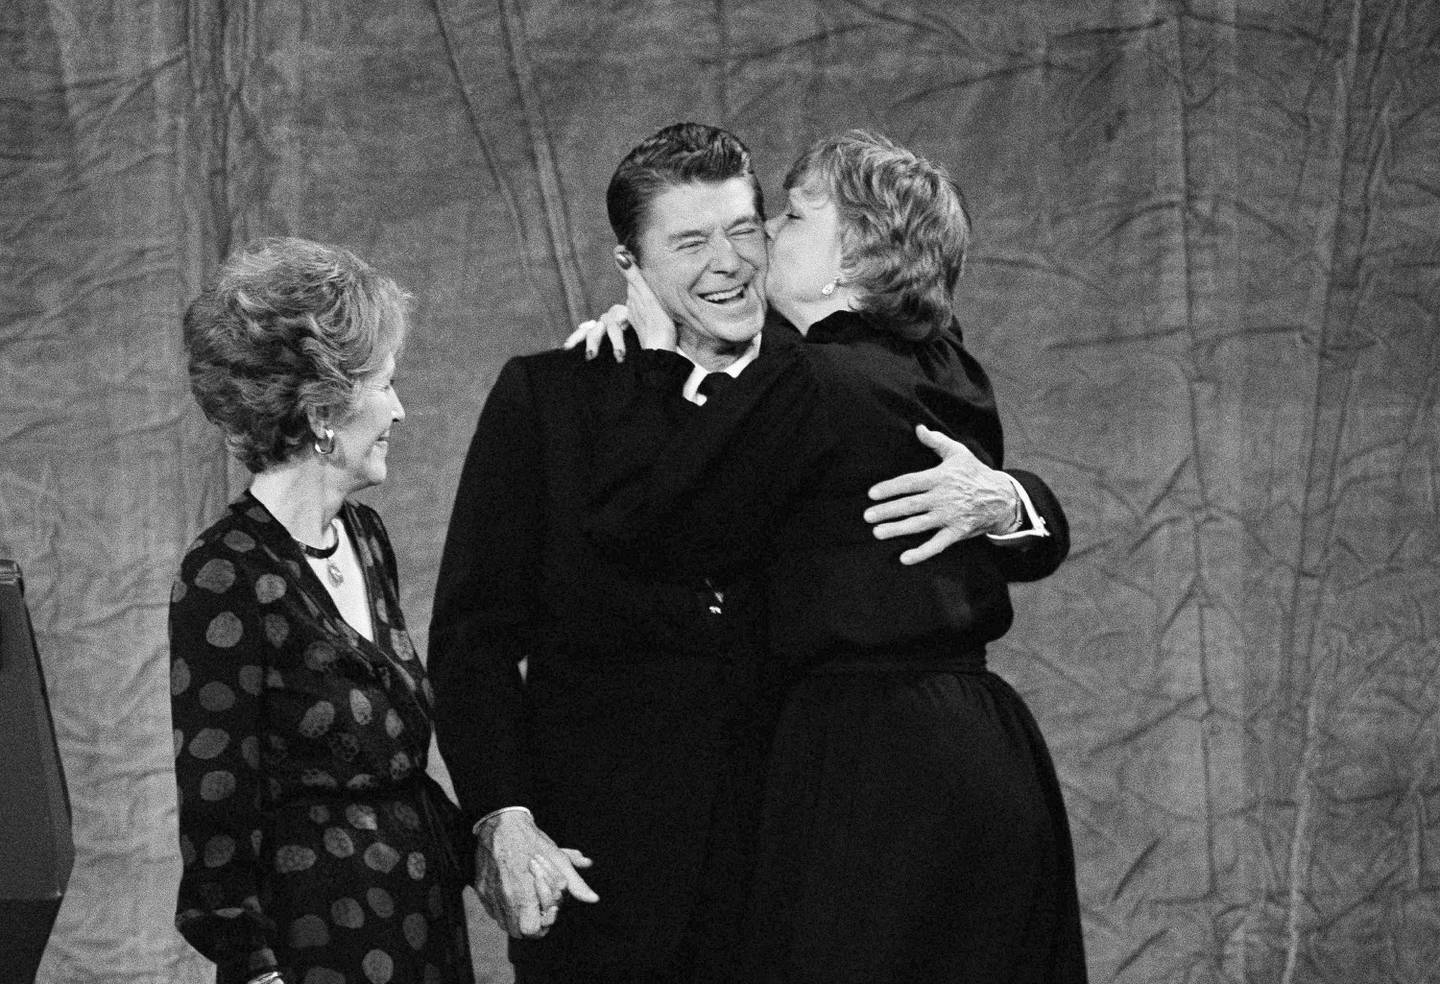 Maureen Reagan, right, gives a kiss to her father, president-elect Ronald Reagan, while Nancy Reagan looks on, Nov. 5, 1980. Reagan shared center stage with his family at Century Plaza Hotel in Los Angeles after defeating President Jimmy Carter in the presidential election. (AP Photo)